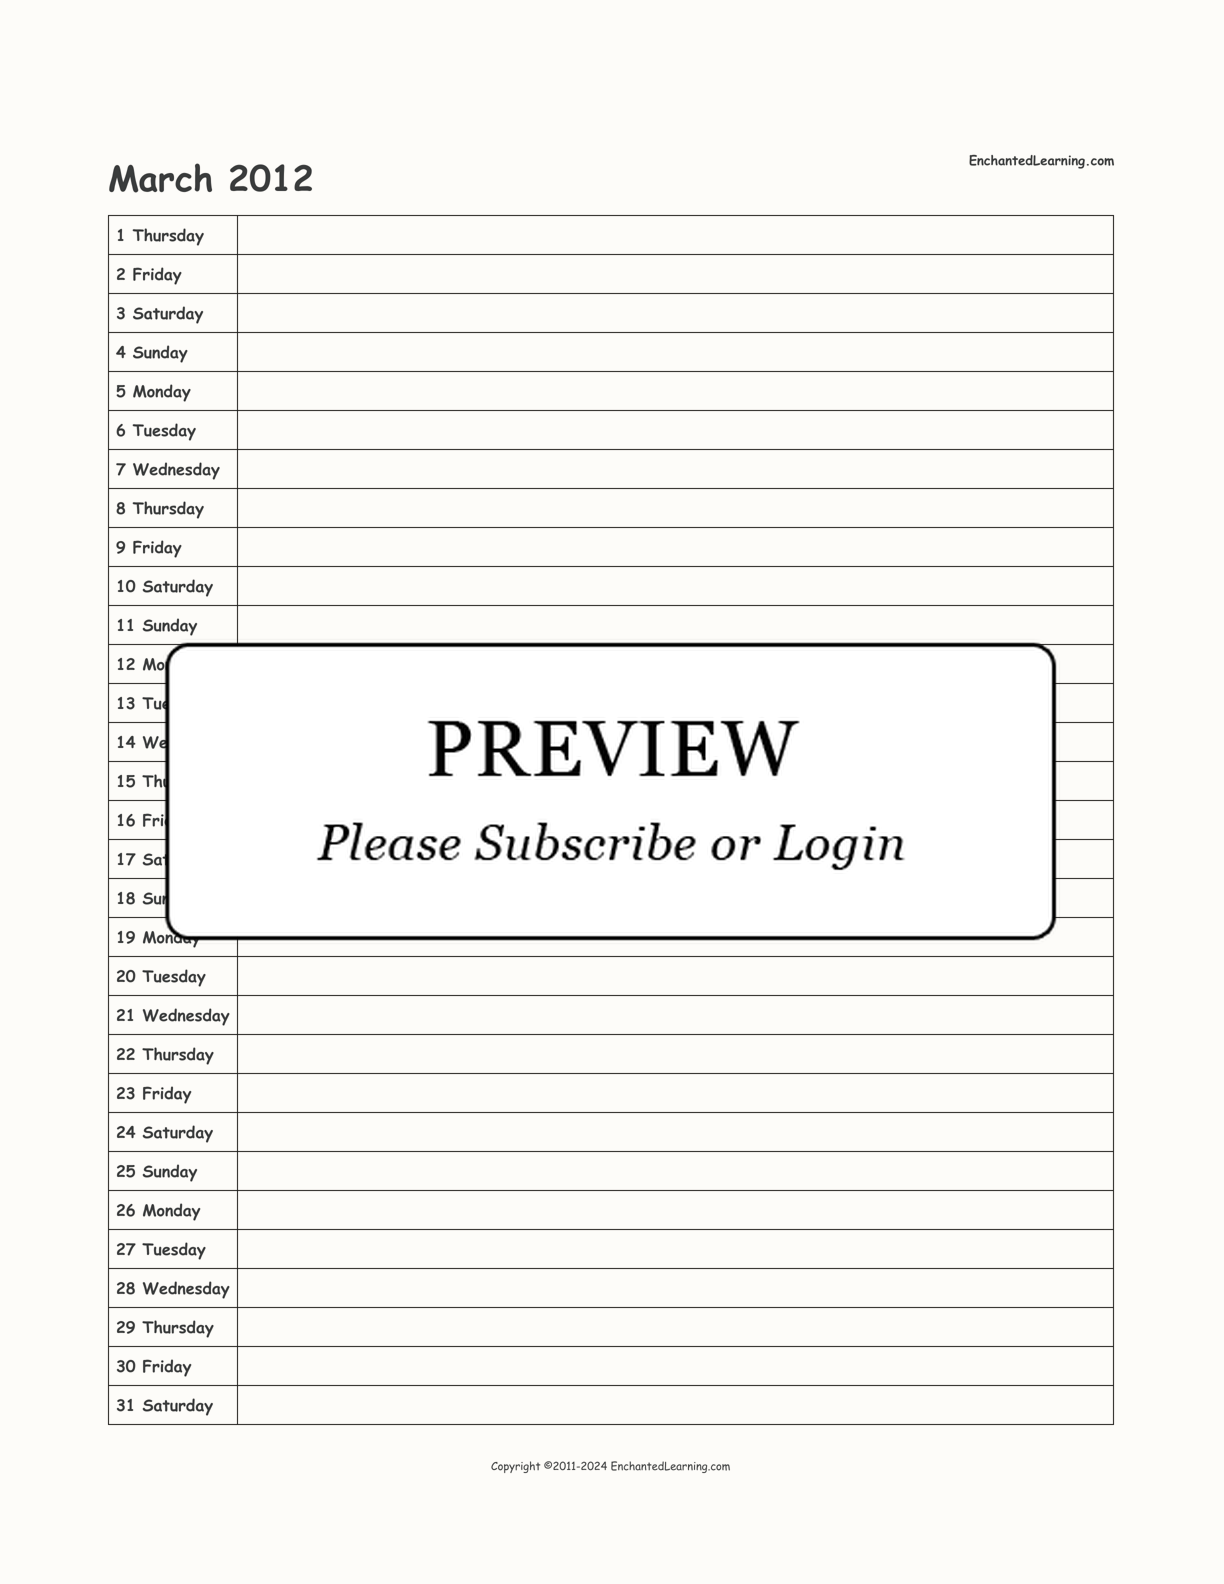 2012 Scheduling Calendar interactive printout page 3